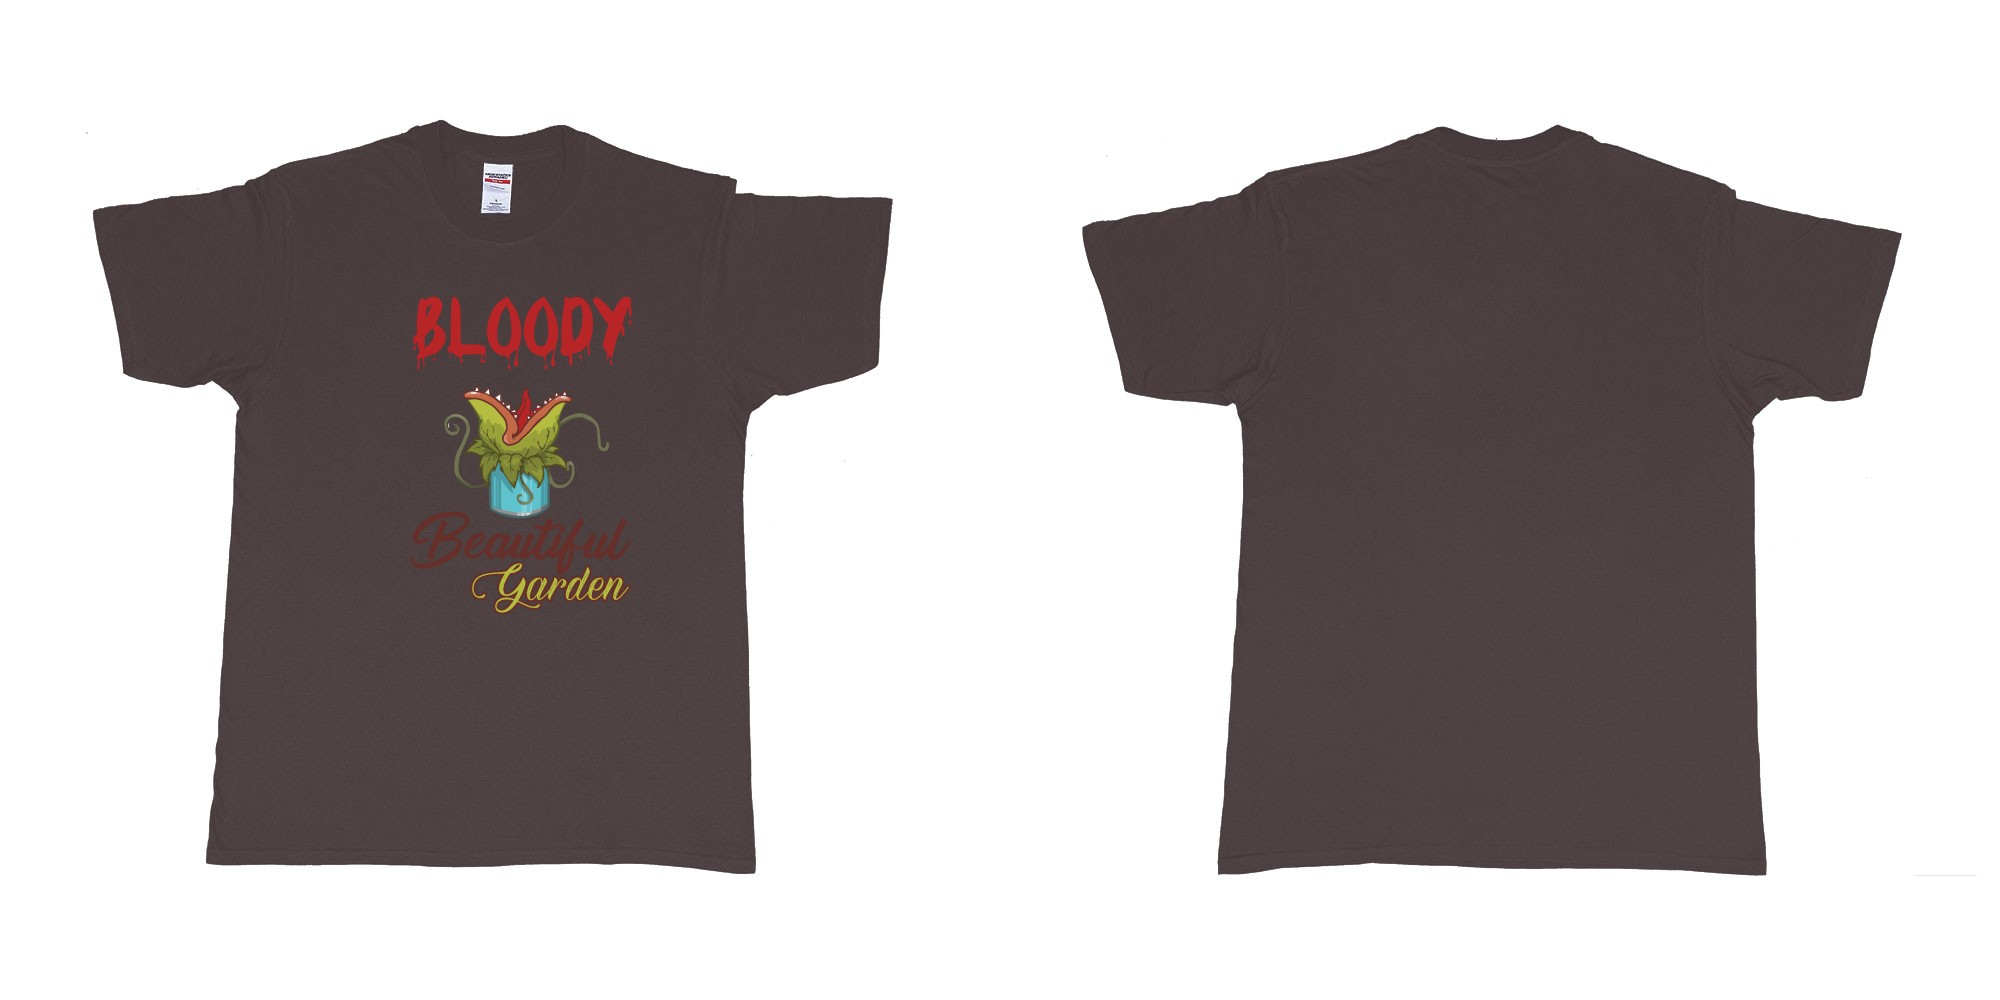 Custom tshirt design bloody beautiful garden little shop of horror in fabric color dark-chocolate choice your own text made in Bali by The Pirate Way